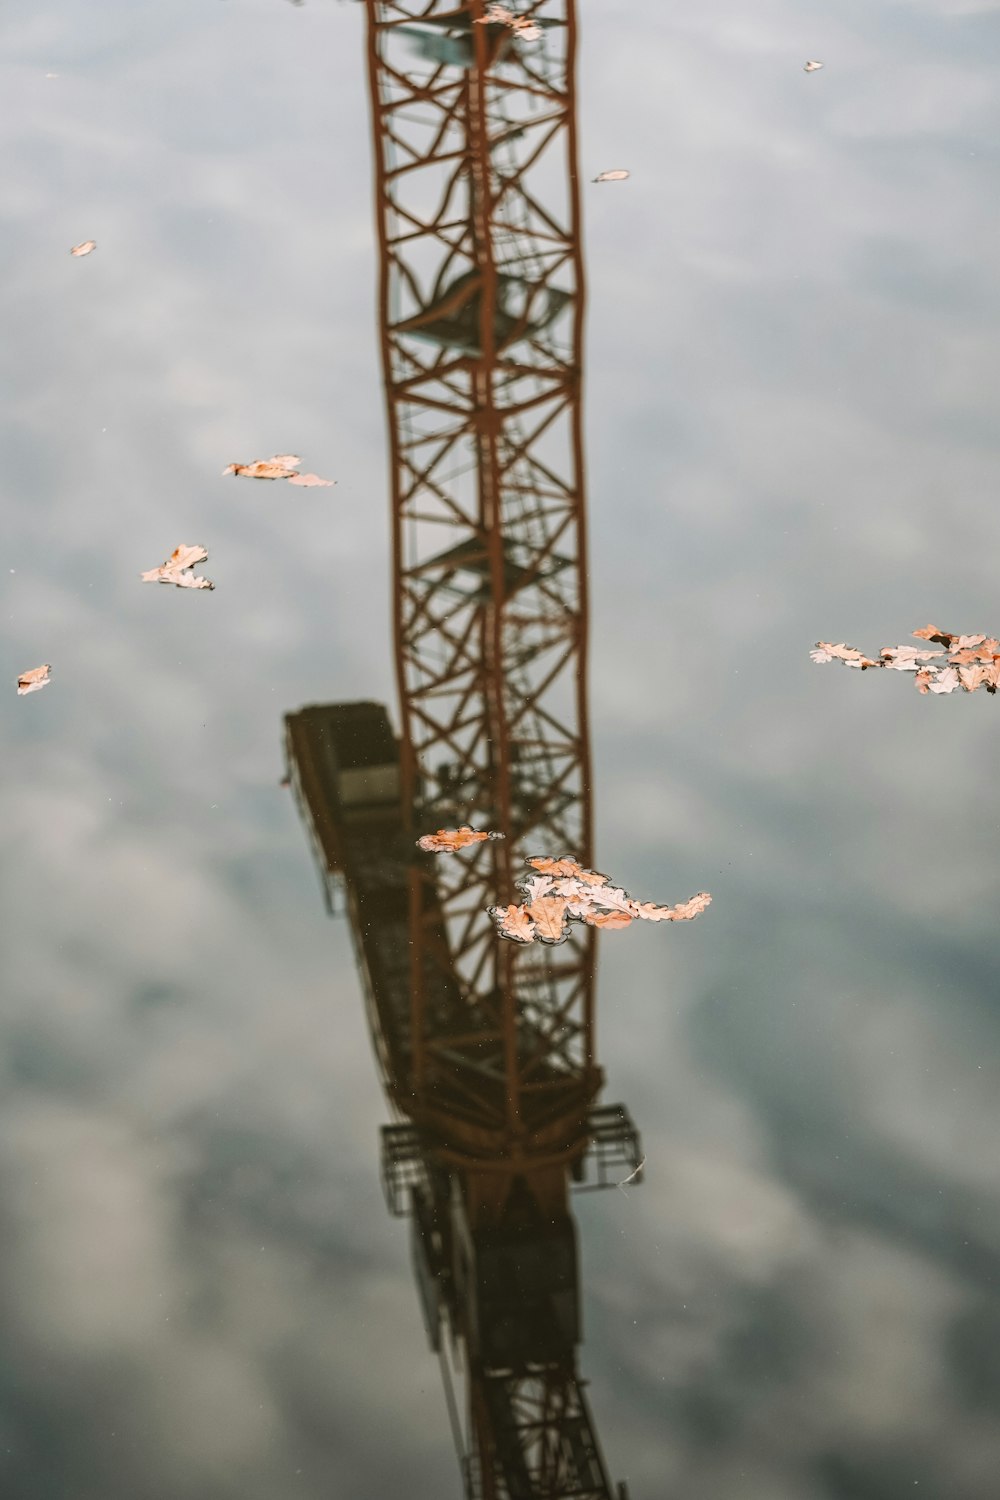 flock of birds flying over the crane under cloudy sky during daytime